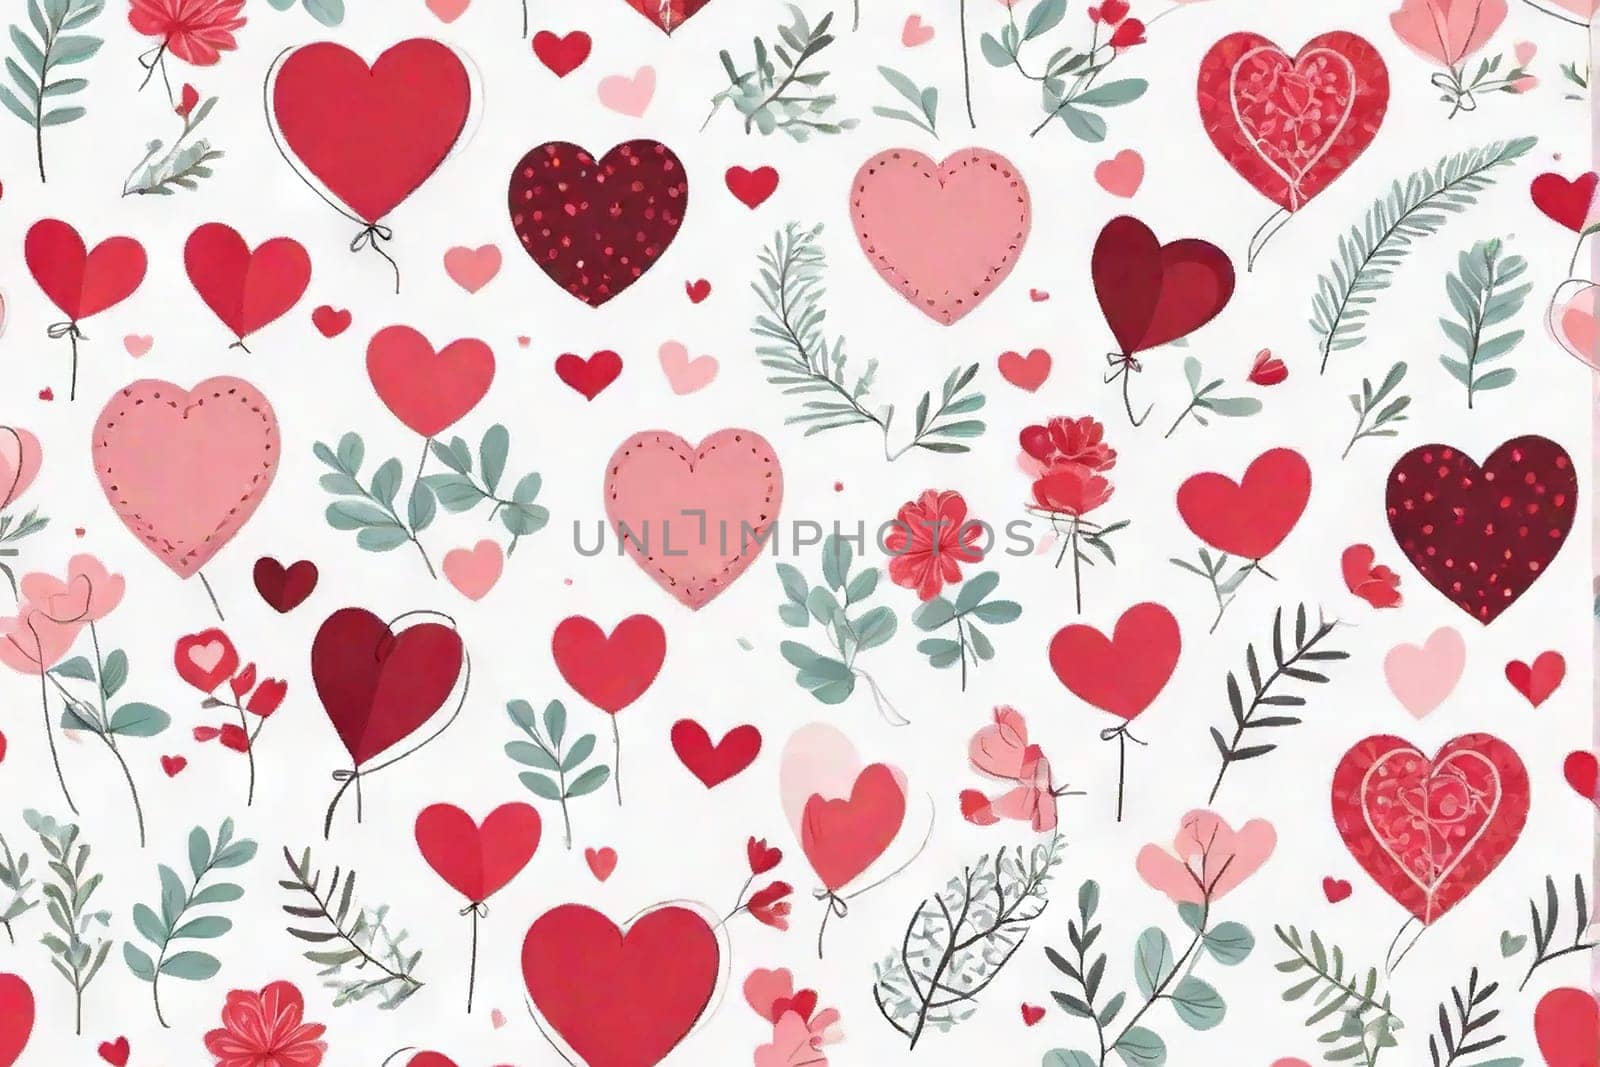 Heart doodle for Valentine's Day. Sketch red heart symbol graphic set. Congratulatory background on gift packaging